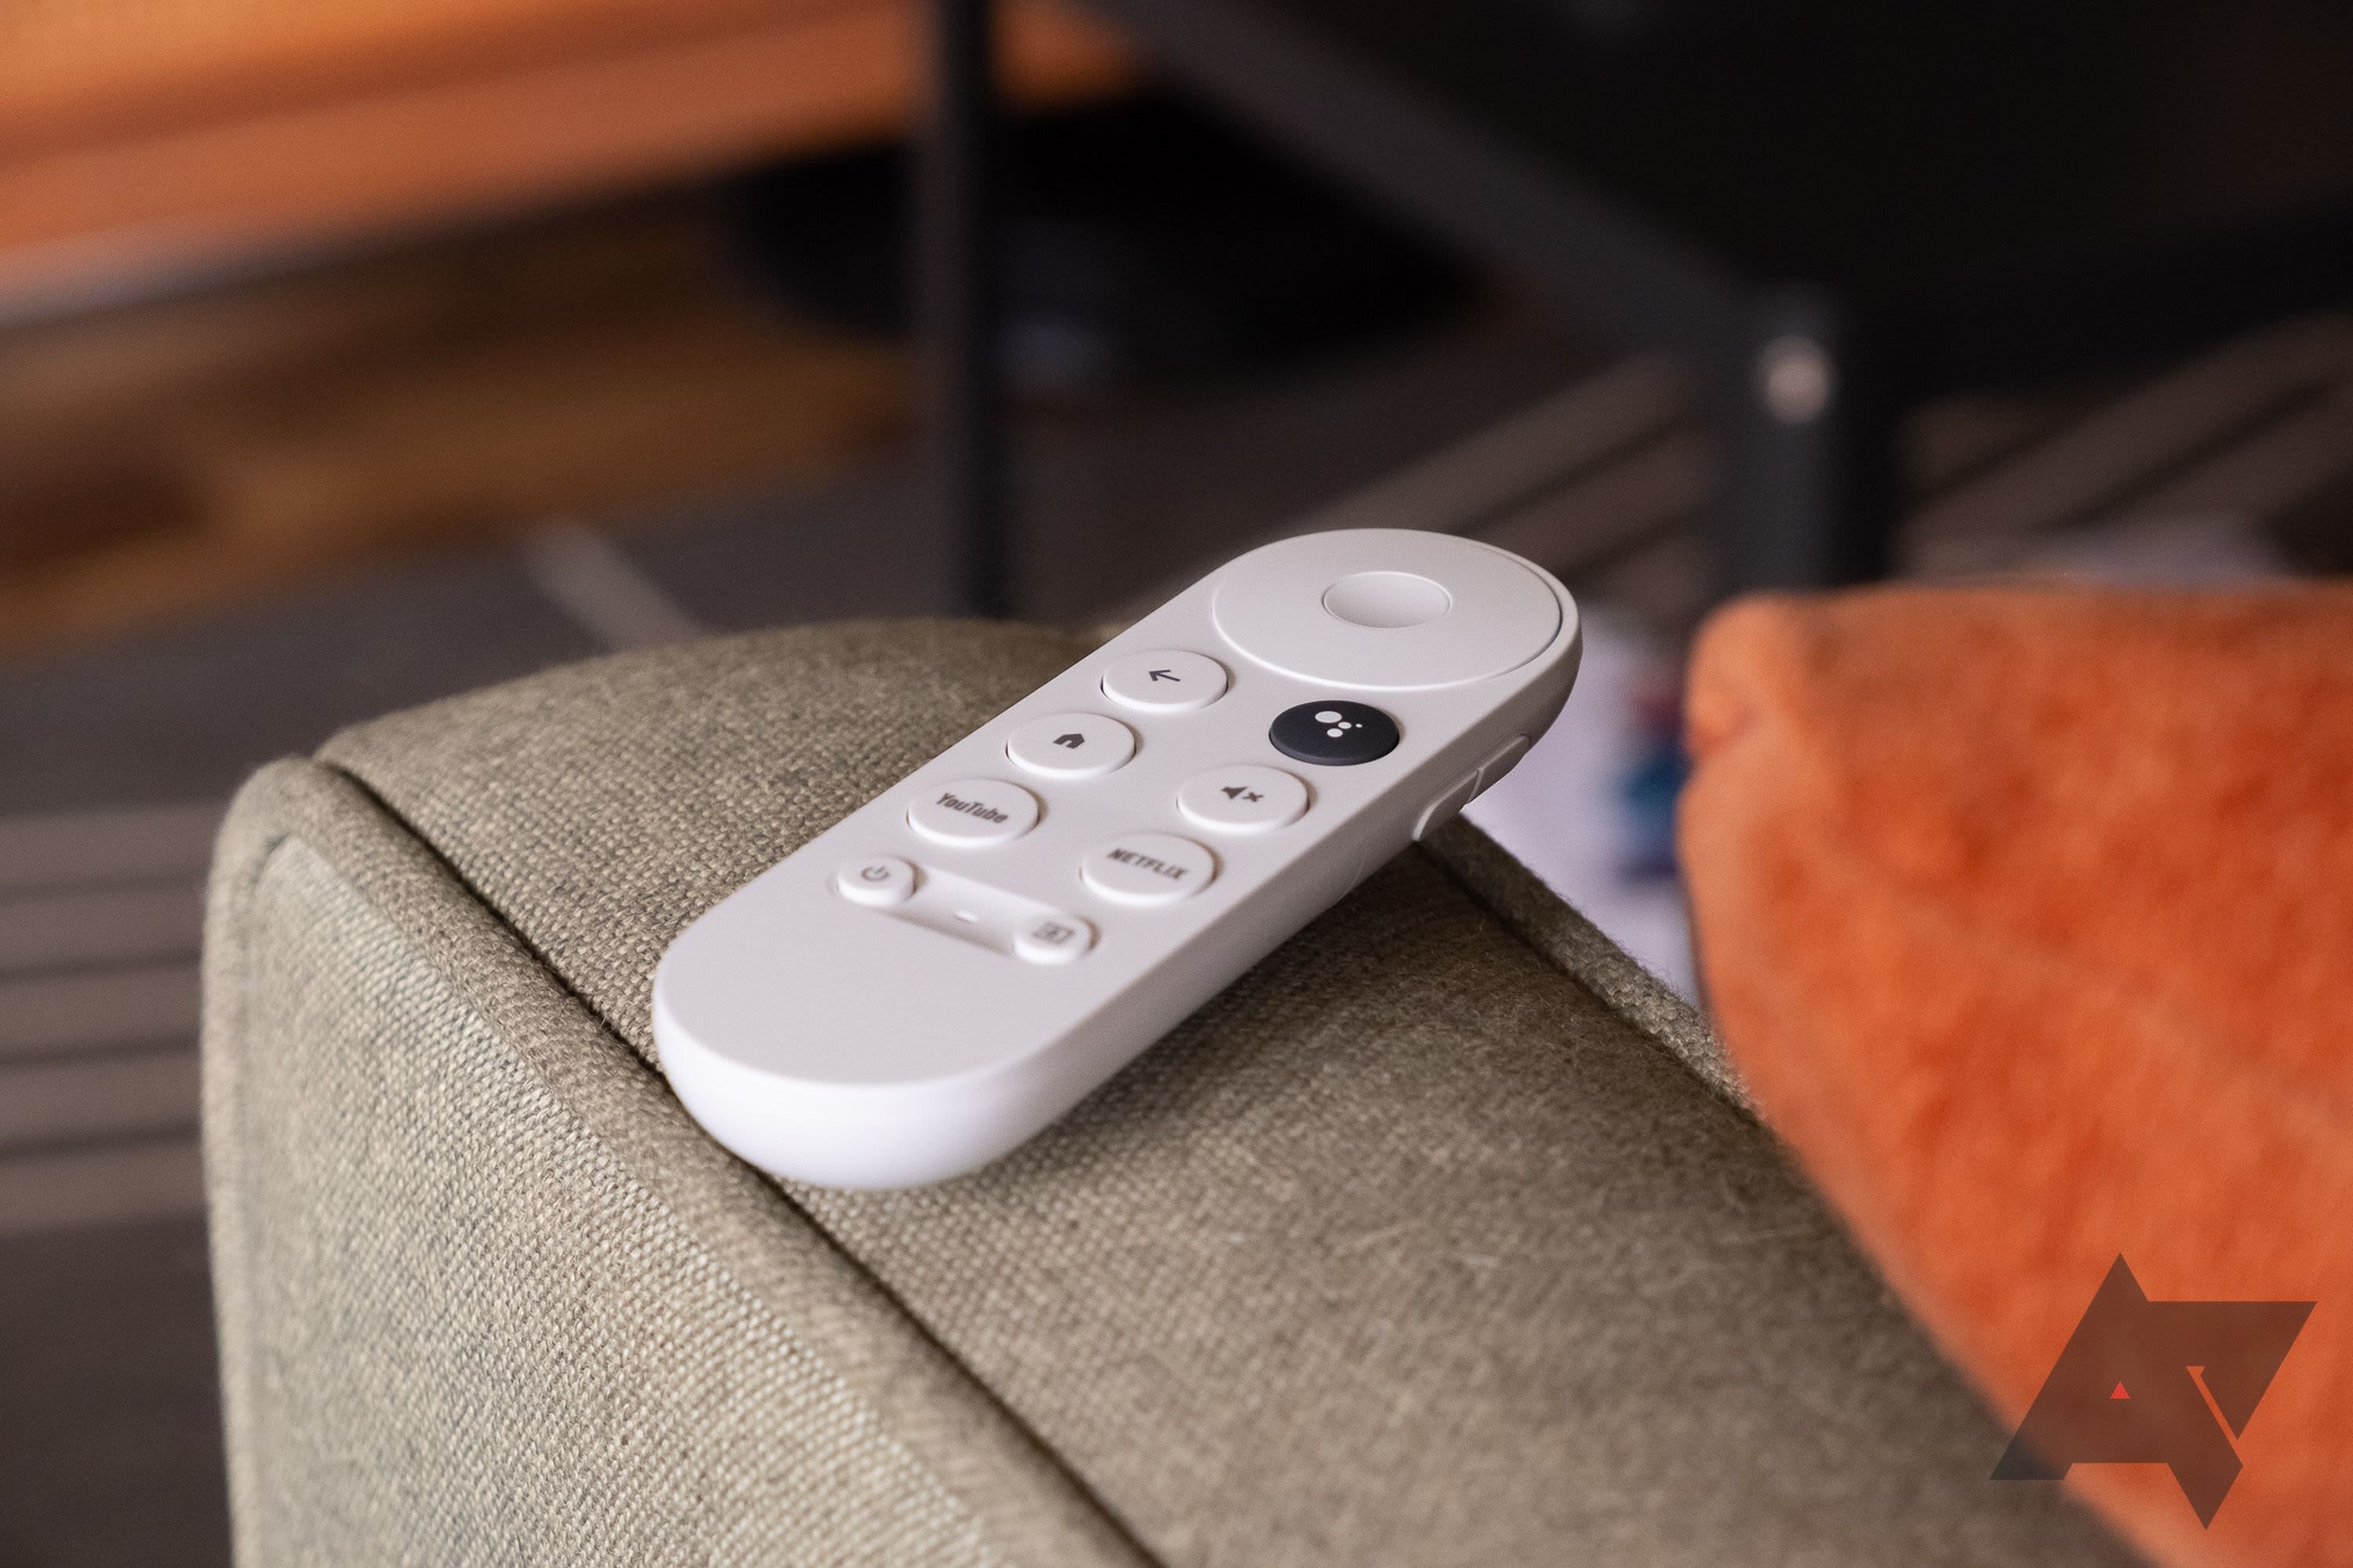 Finding your Google TV’s lost remote will soon become less frustrating